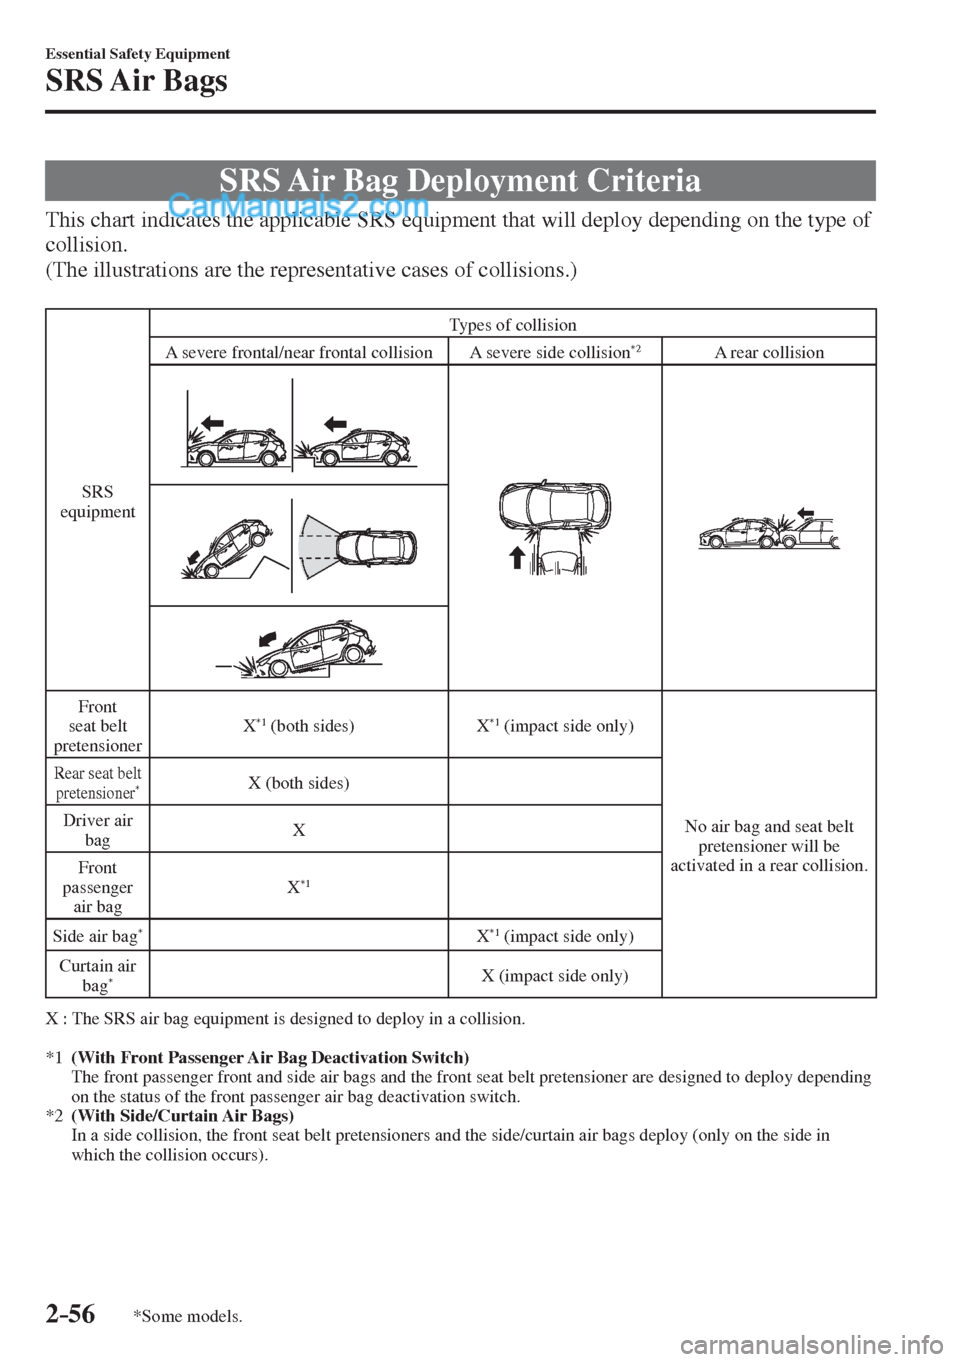 MAZDA MODEL 2 2017   (in English) Manual PDF 2–56
Essential Safety Equipment
SRS Air  Bags
*Some models.
 SRS Air Bag Deployment Criteria
            This chart indicates the applicable SRS equipment that will deploy depending on the type of 
